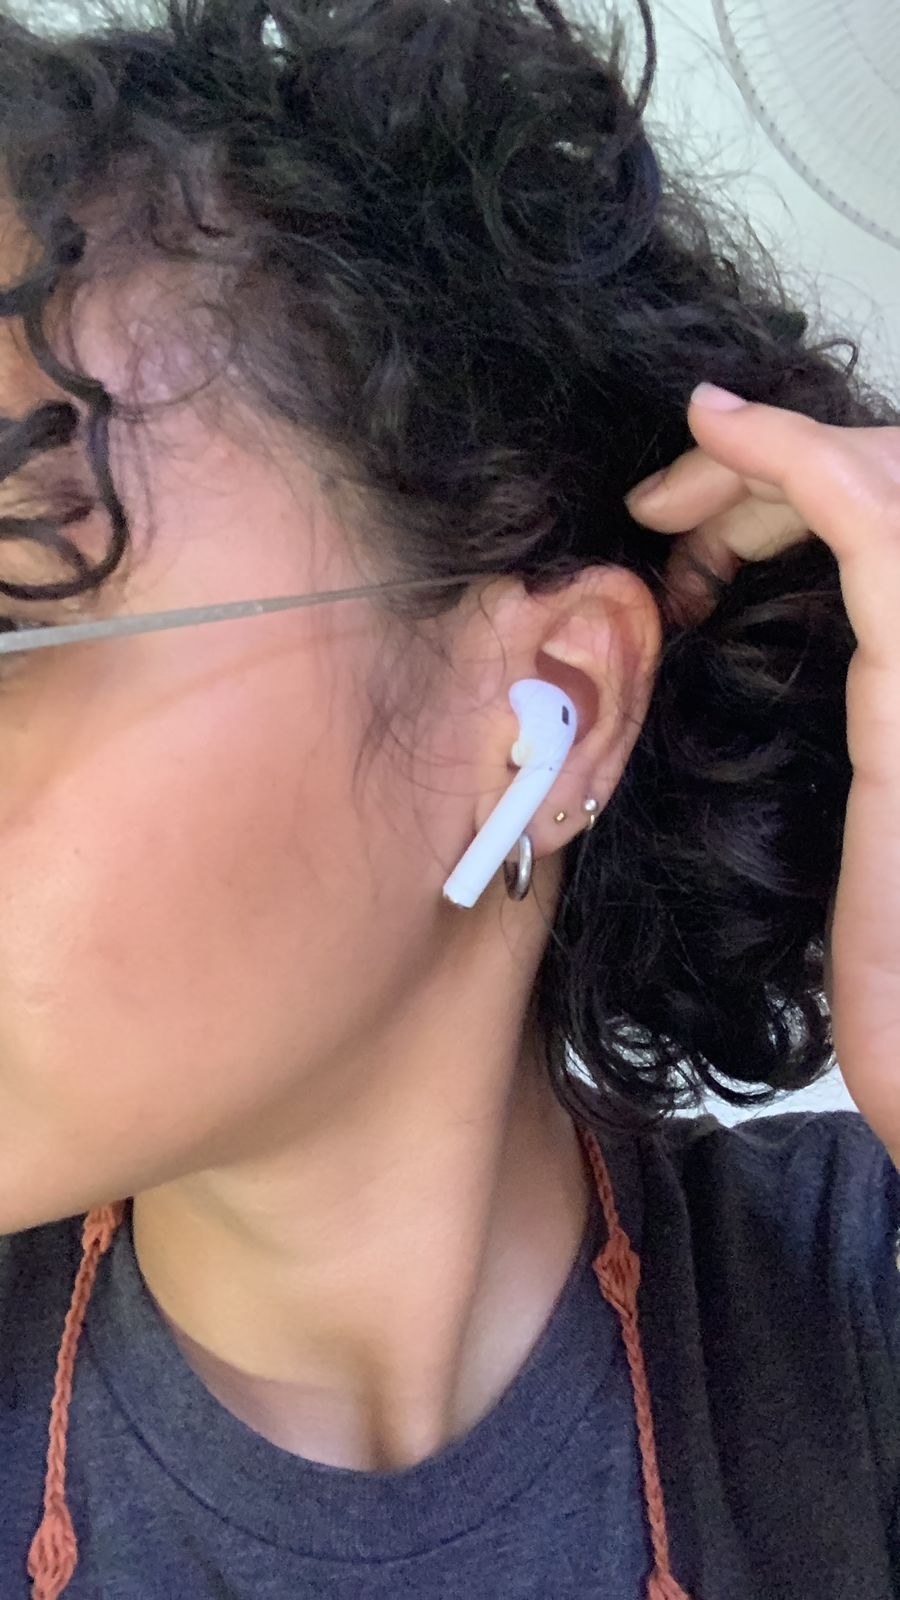 A reviewer with the airpod in their ear